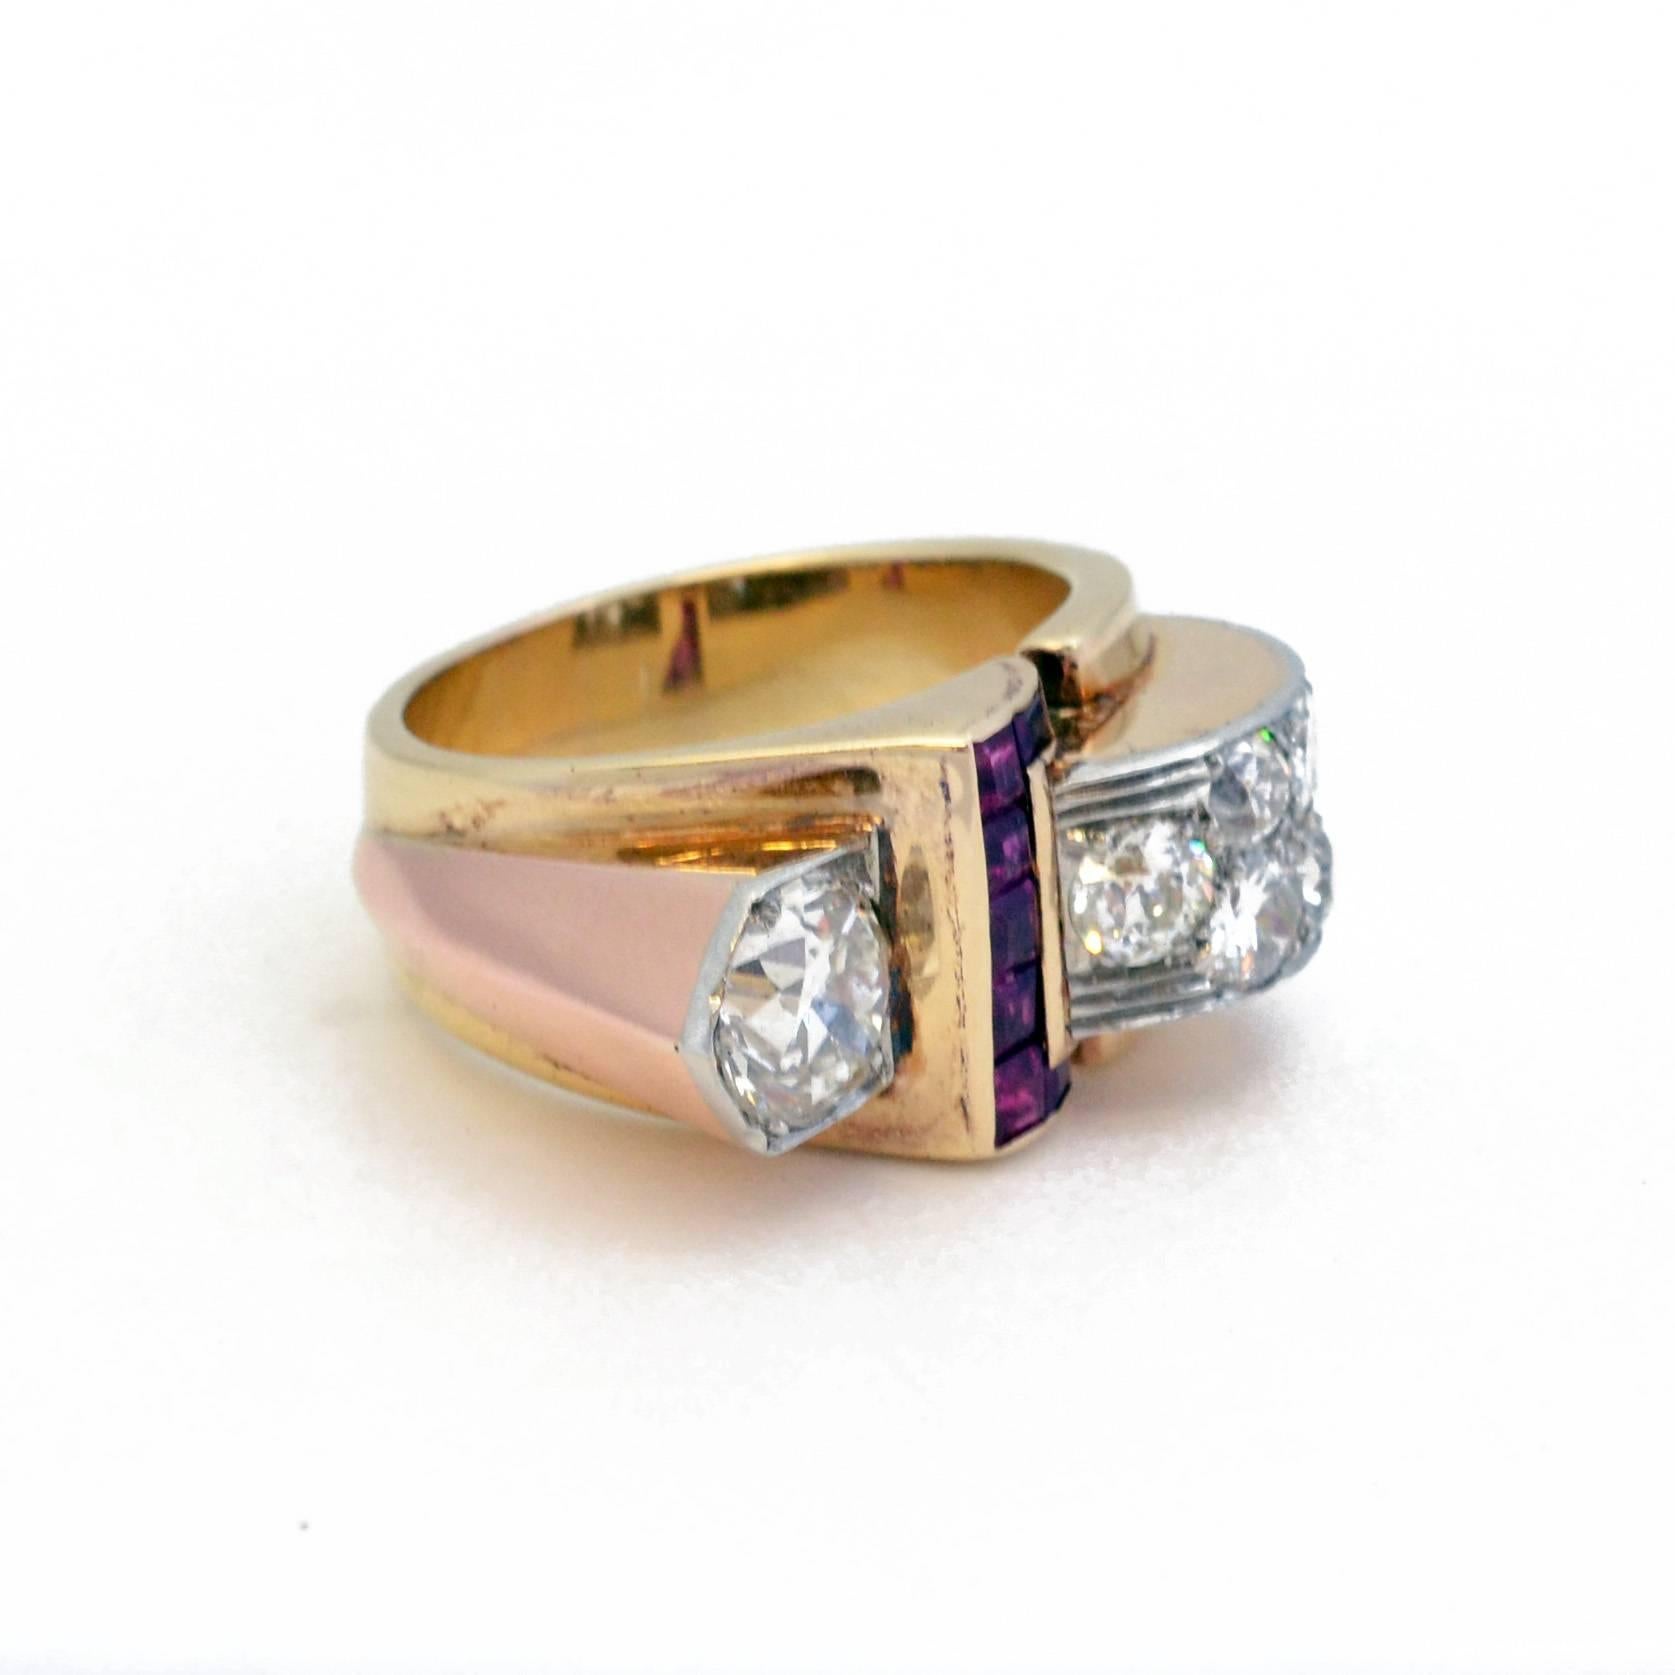 A diamond set dress ring, with stylised ruby set ‘buckle’. Mounted in 18ct yellow and rose gold, topped with platinum. American, circa 1940. Principle diamond weighs approximately 0.85ct. 

Size N.5